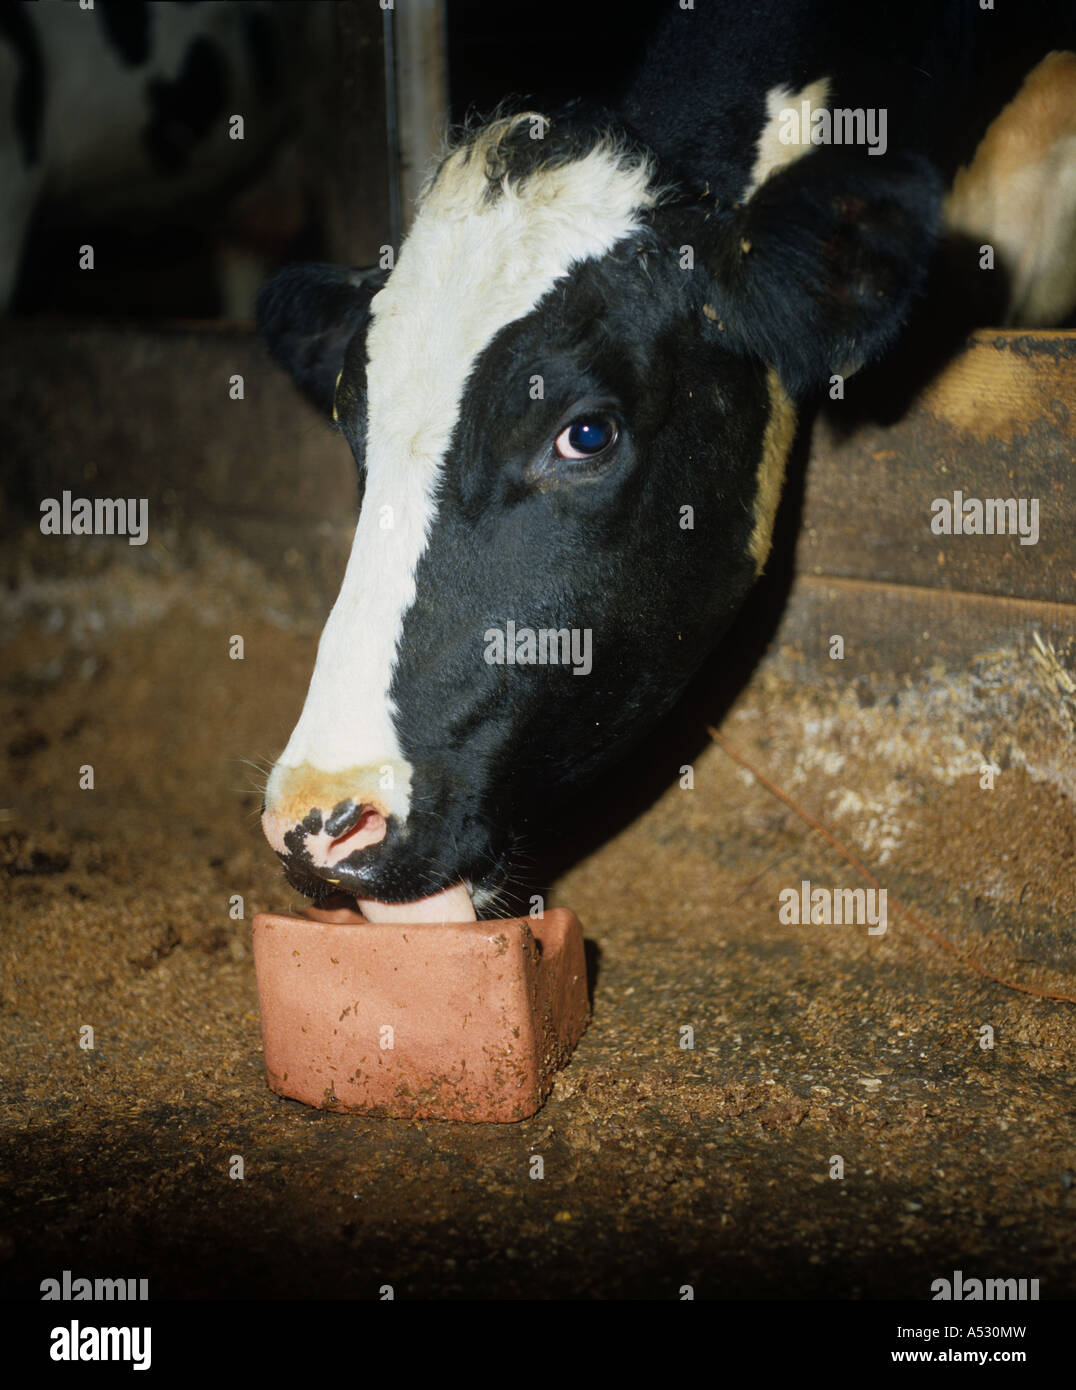 Holstein Friesian dairy cow with mineral cattle lick Stock Photo